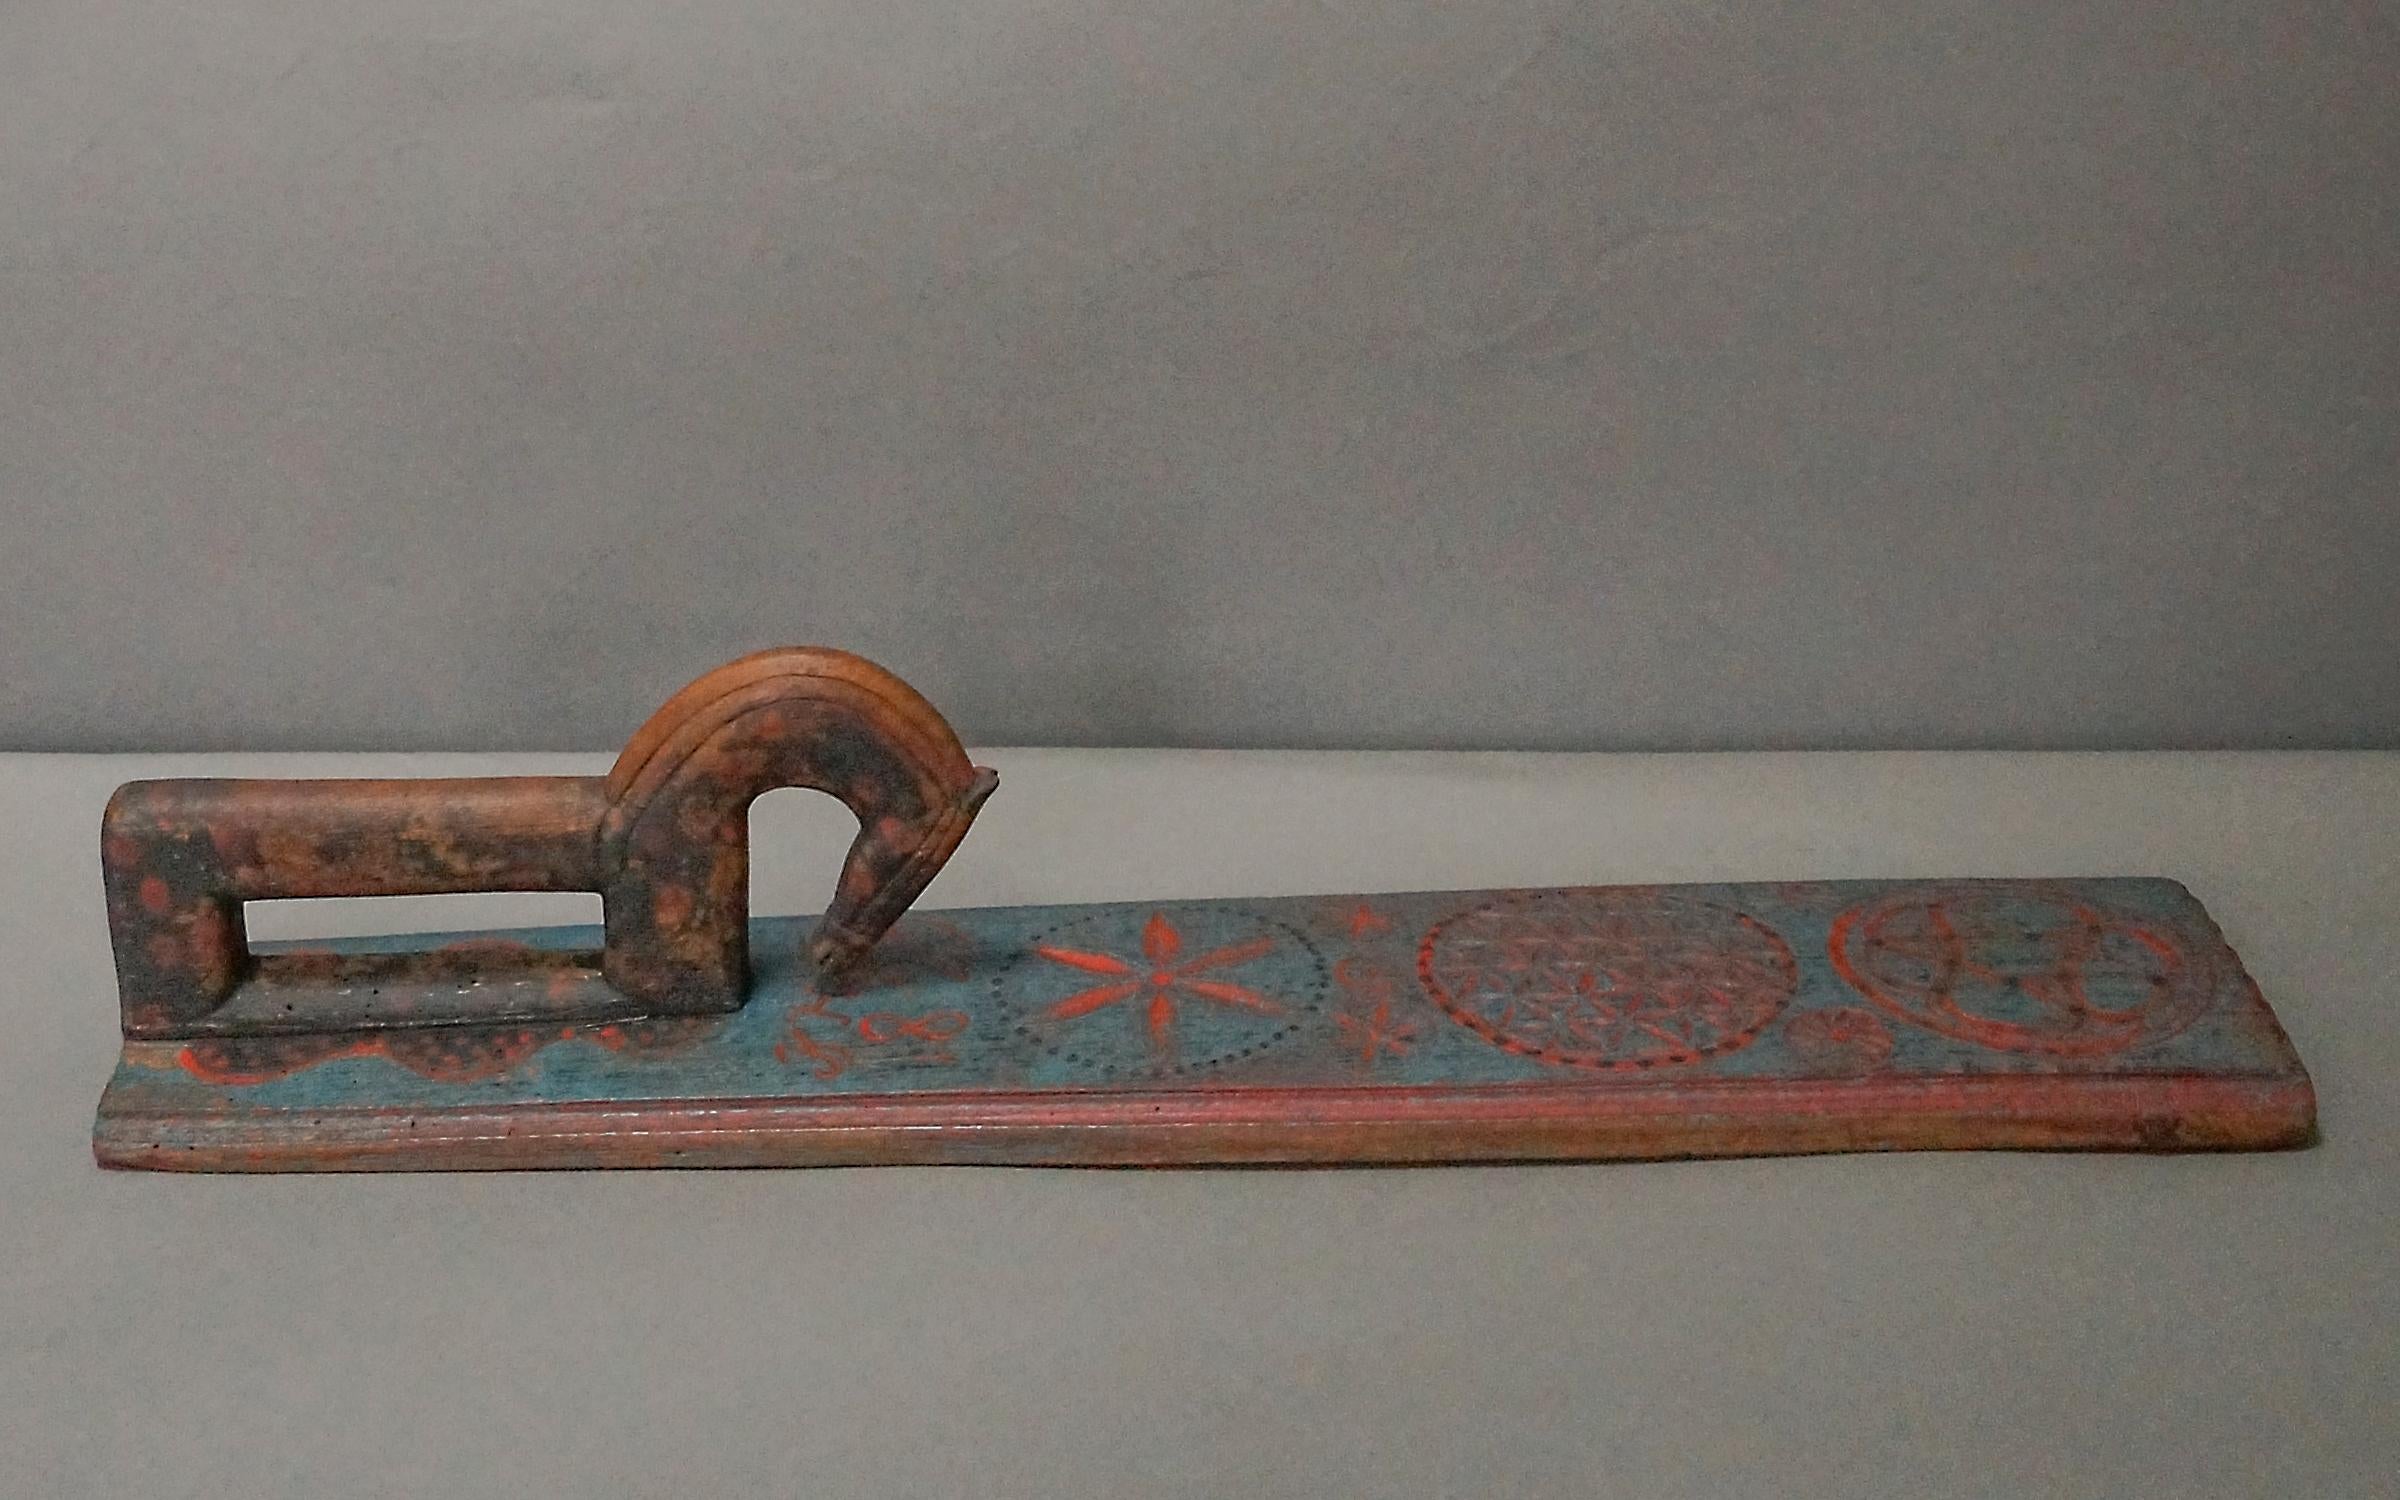 Charming hand-carved Swedish mangle board dated 1829. The beautifully carved horse-shaped handle has an arching neck and is painted with salmon polka dots. The dots continue onto the board itself to pool at the horse’s feet. Further along, the board